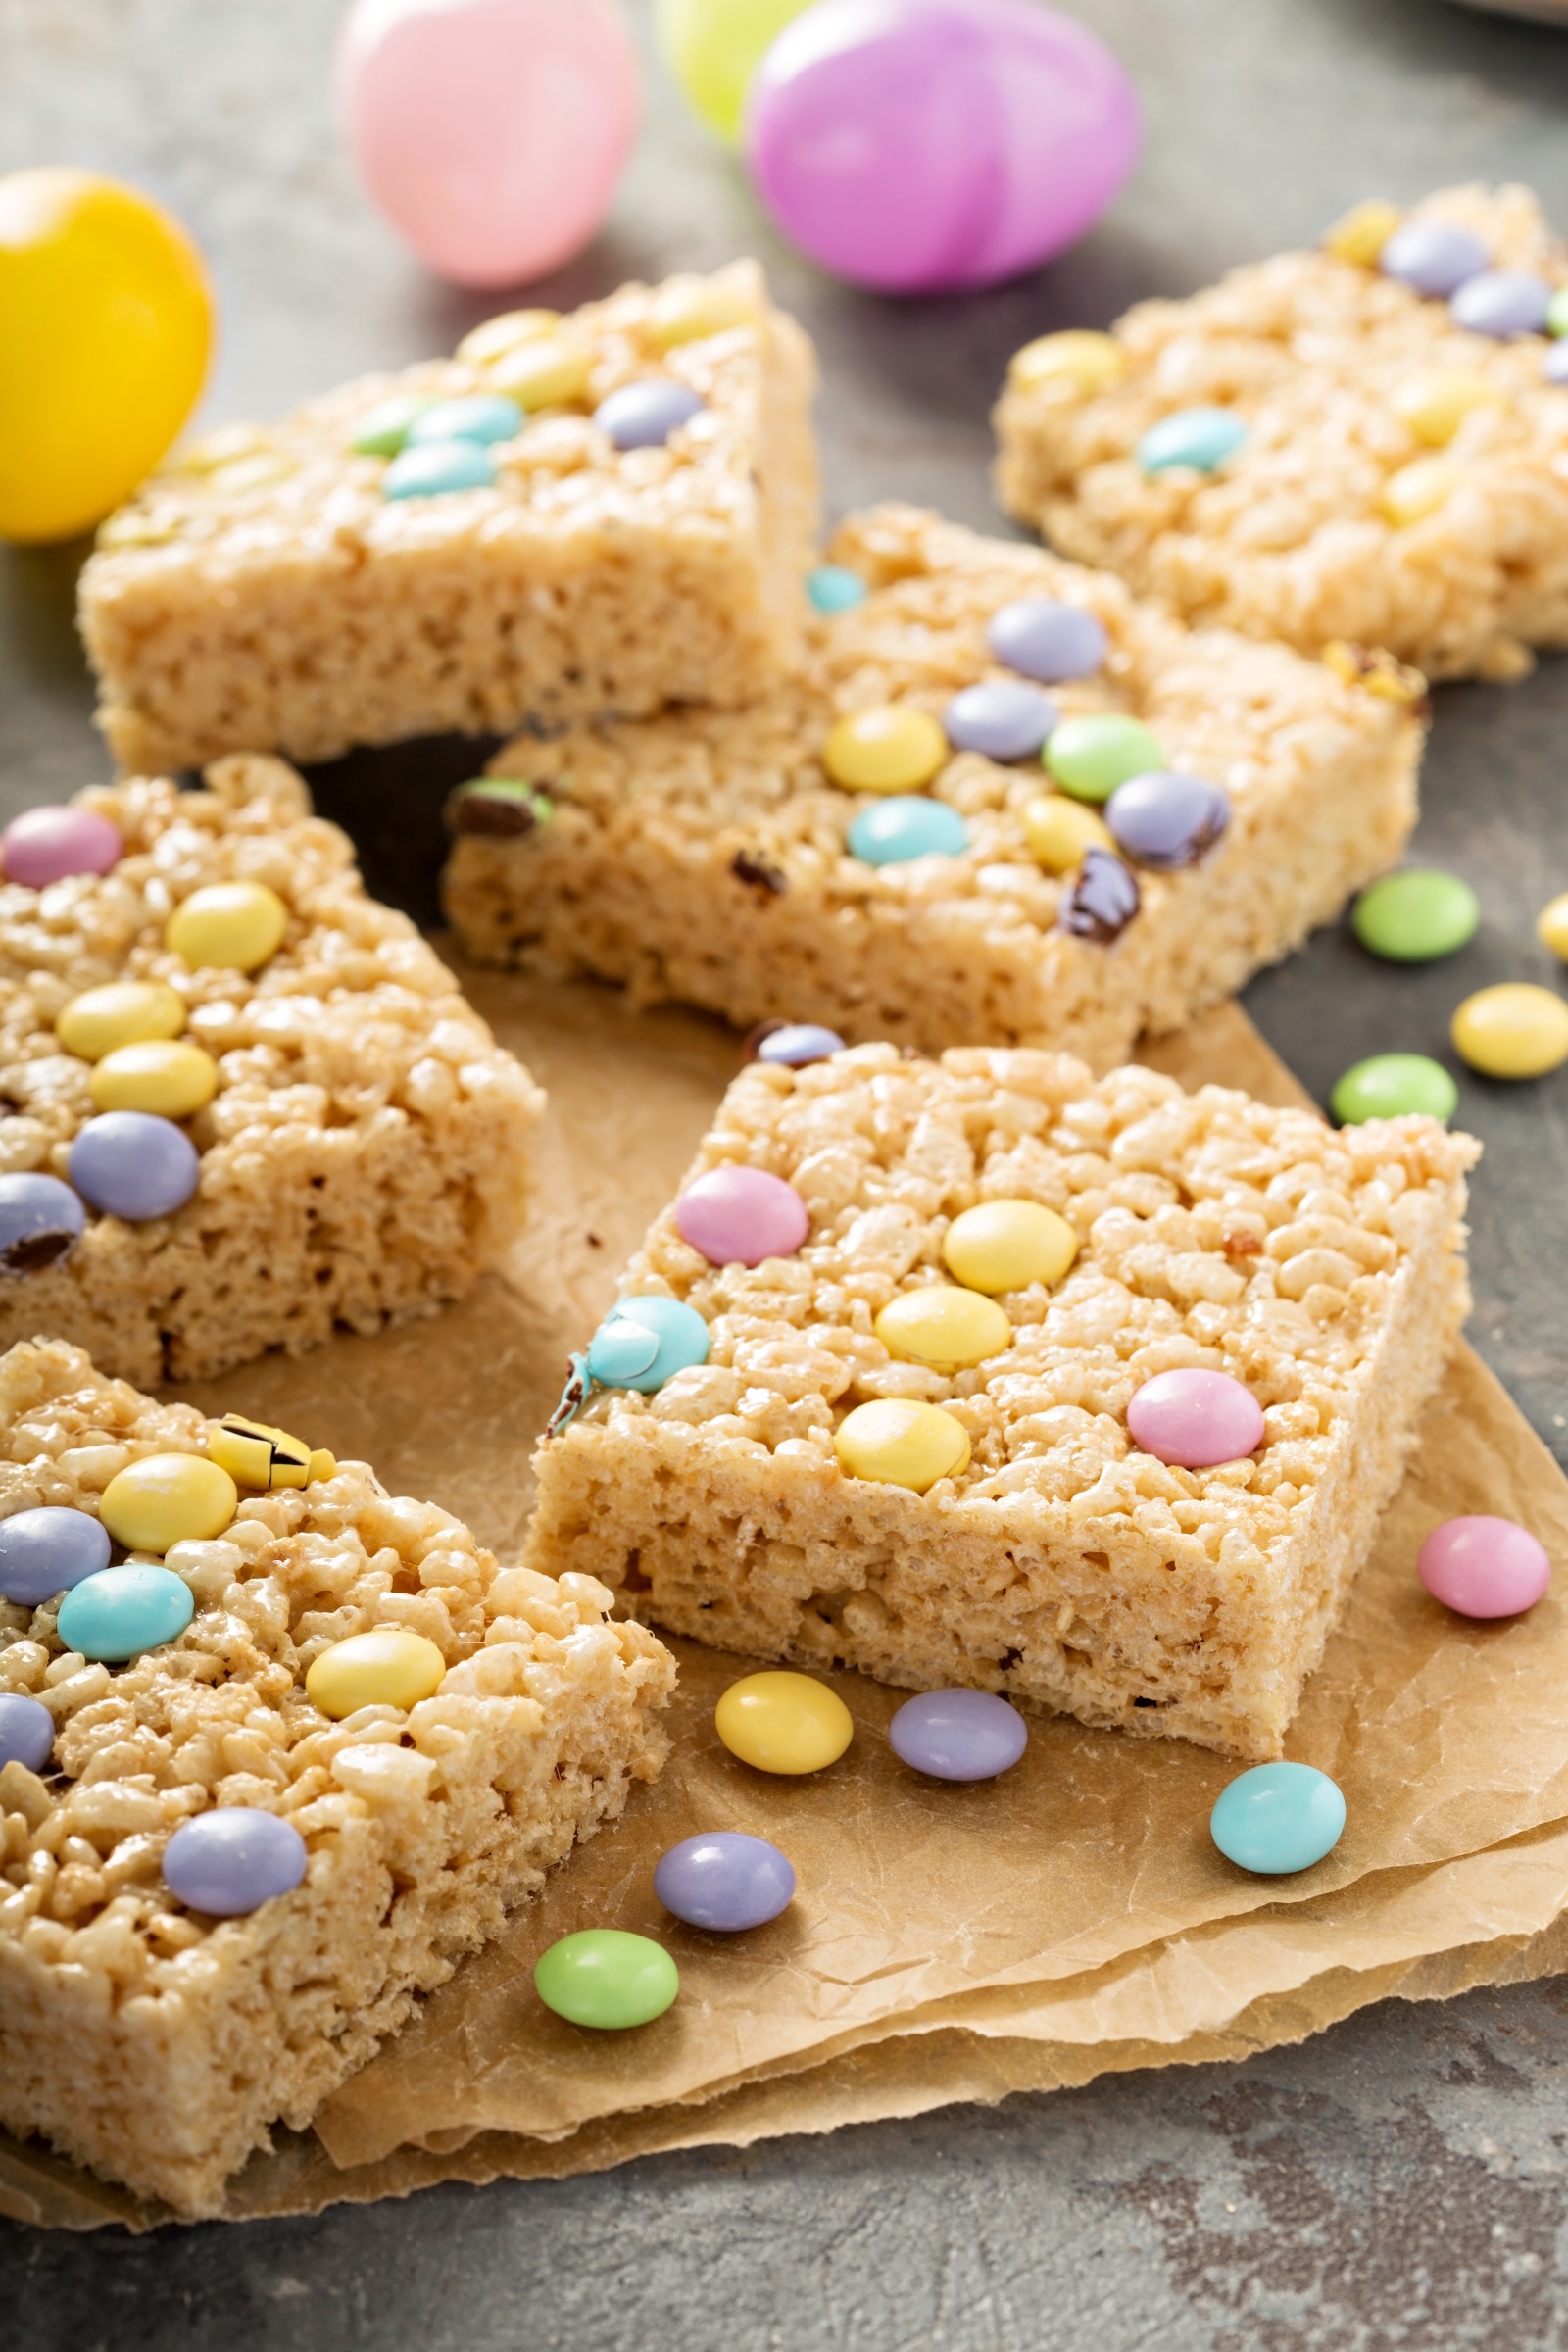 Are Rice Krispies Gluten Free? Plus 6 Brands that are!